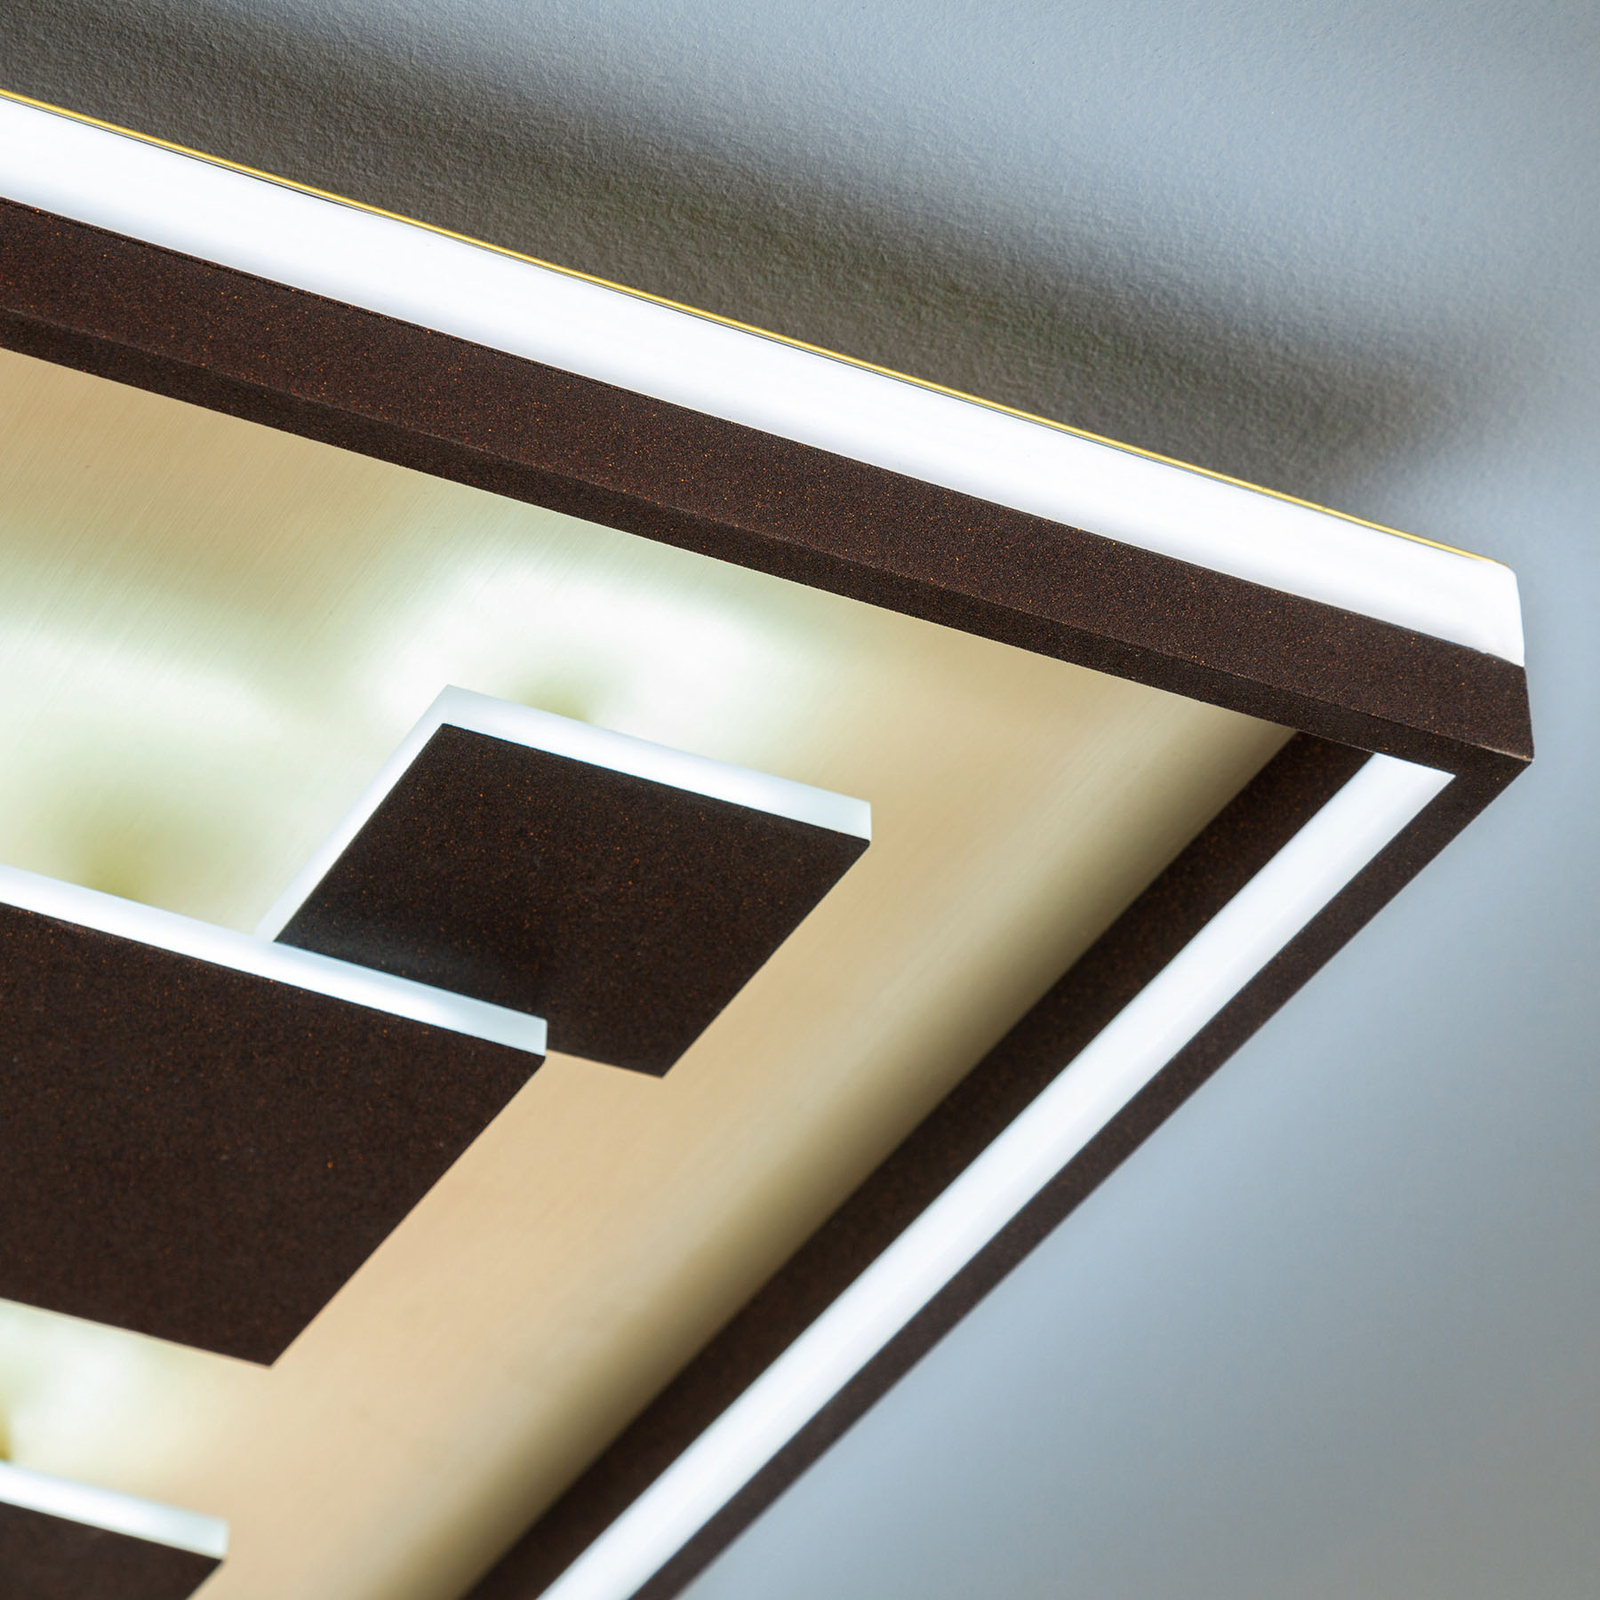 Rico LED ceiling light, dimmable, angular, brown